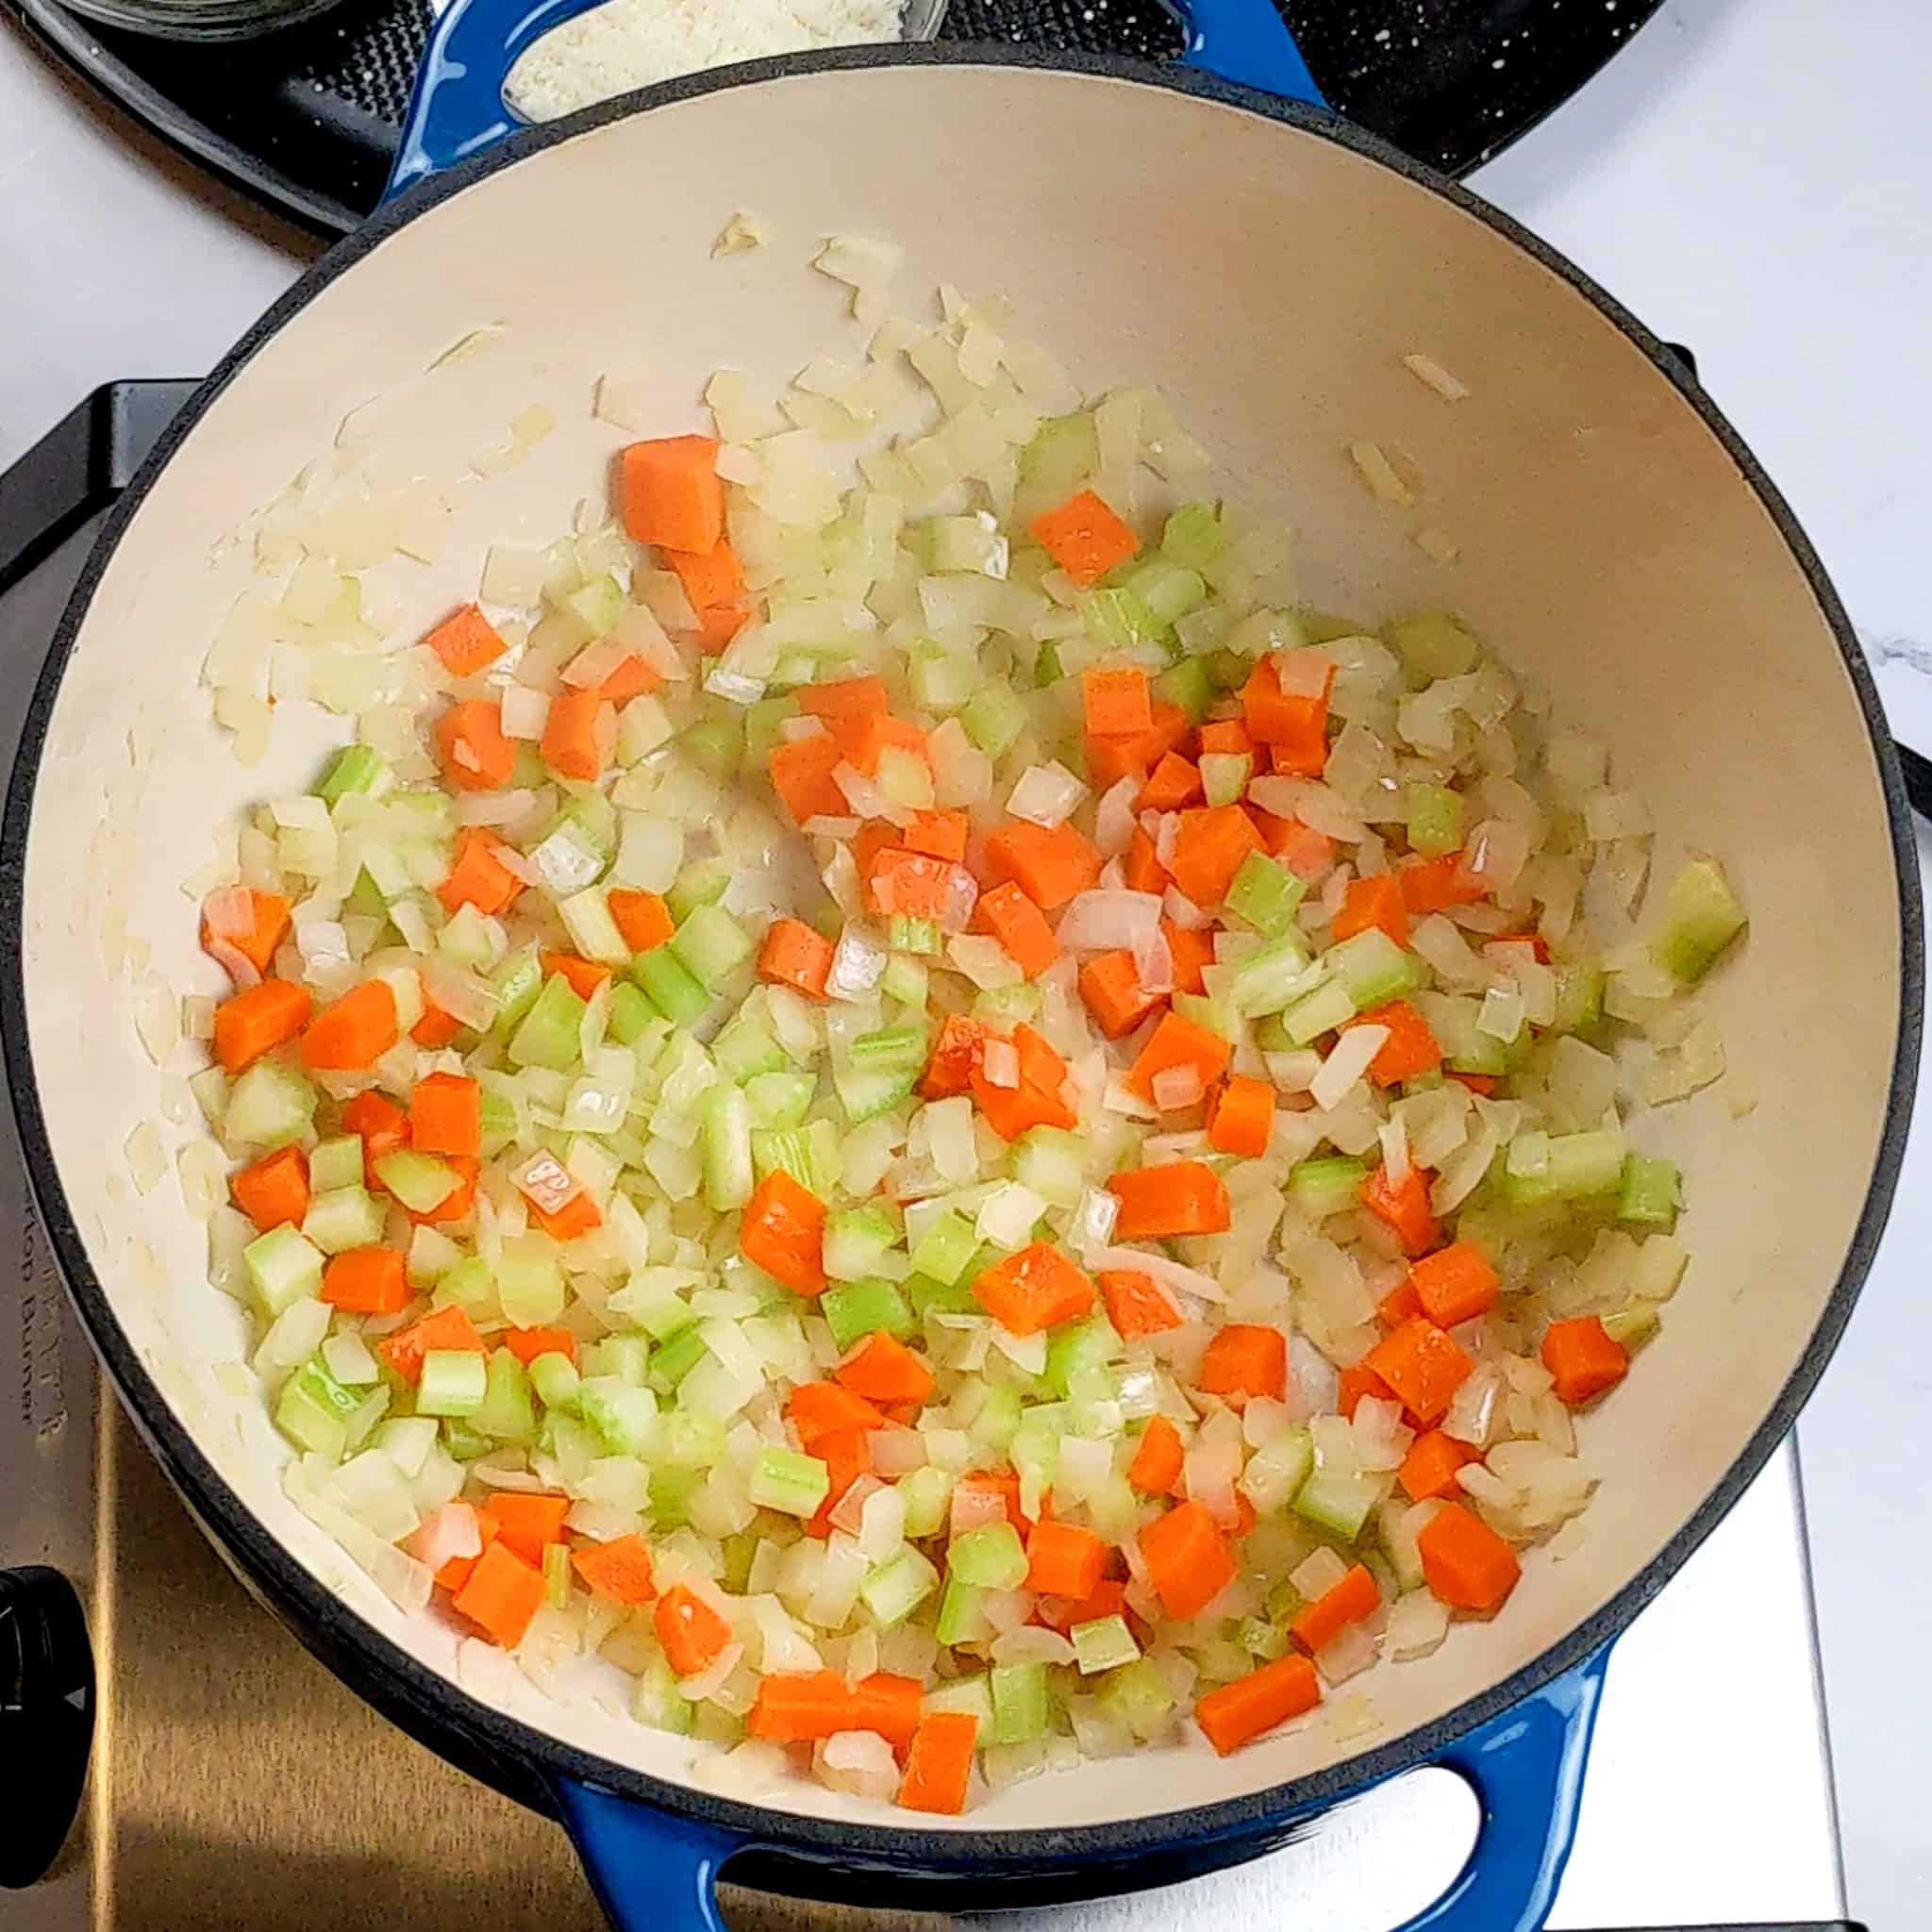 A mirepoix of onions, carrots and celery sweating in a dutch oven